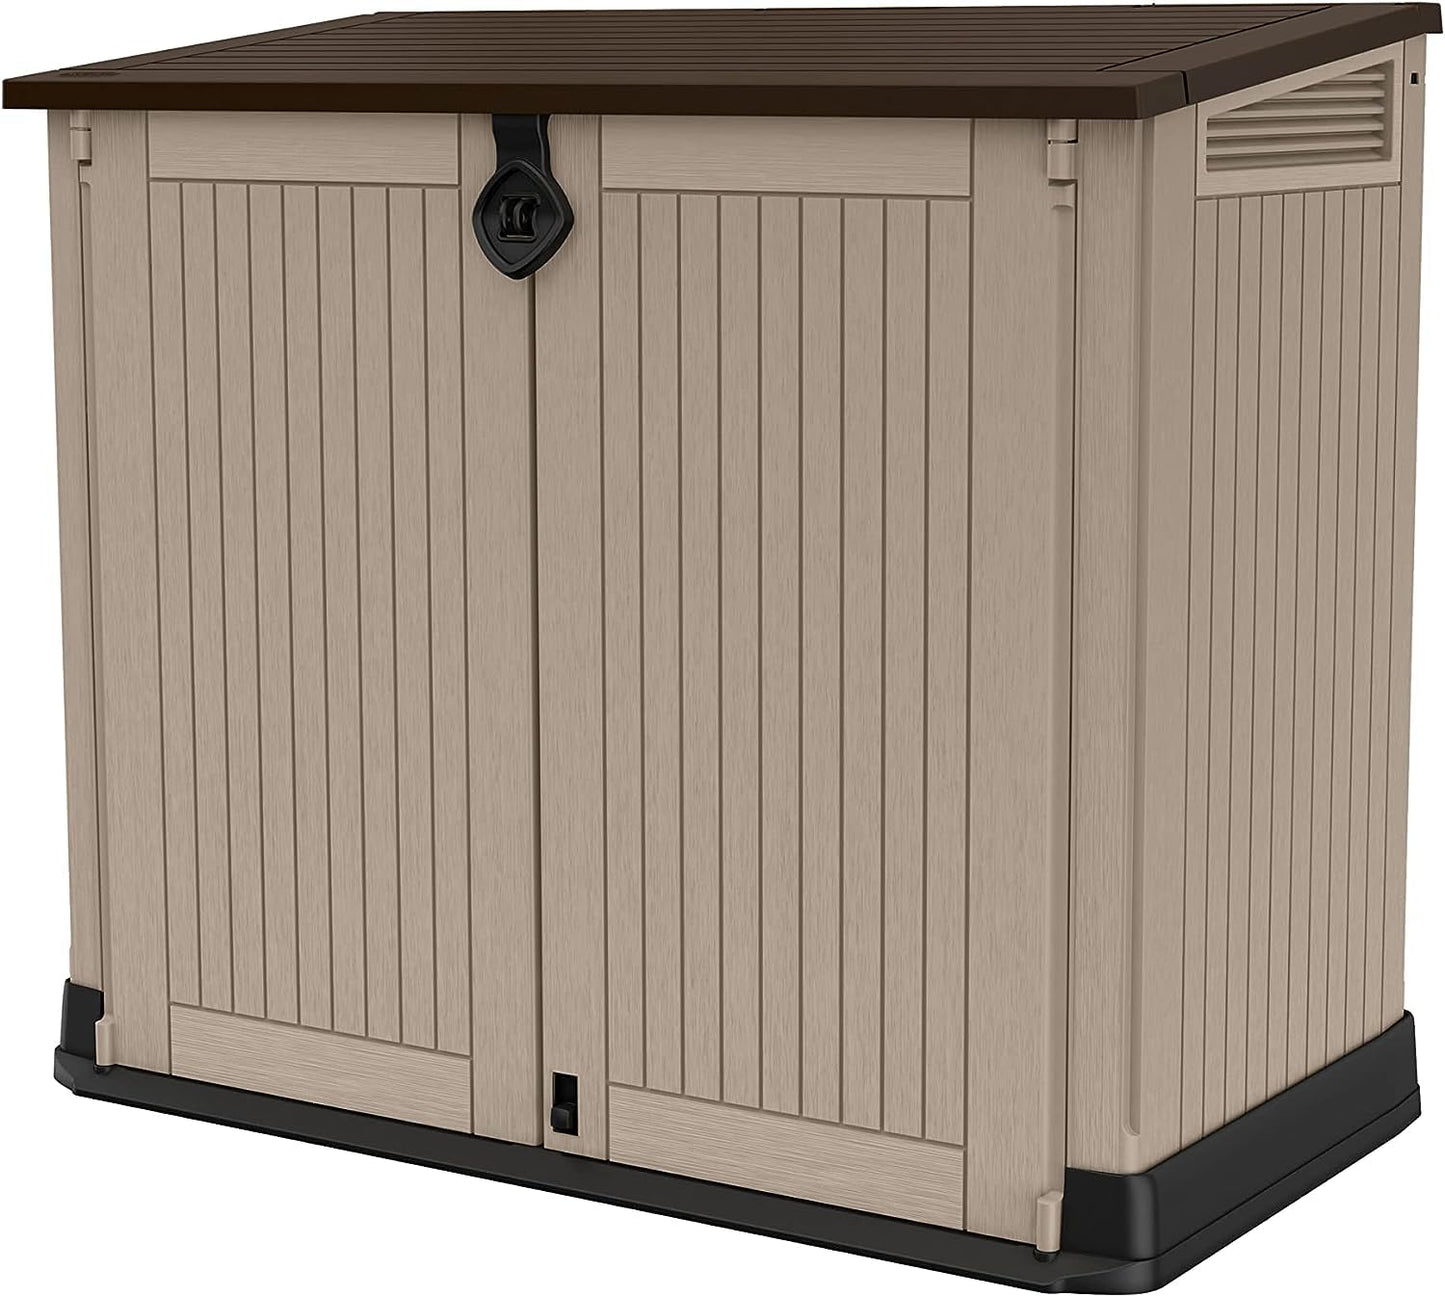 Keter Store-It Out Midi Outdoor Shed: Beige/Brown, 130 x 74 x 110 cm, Weather-resistant, Secure Storage, Easy Assembly